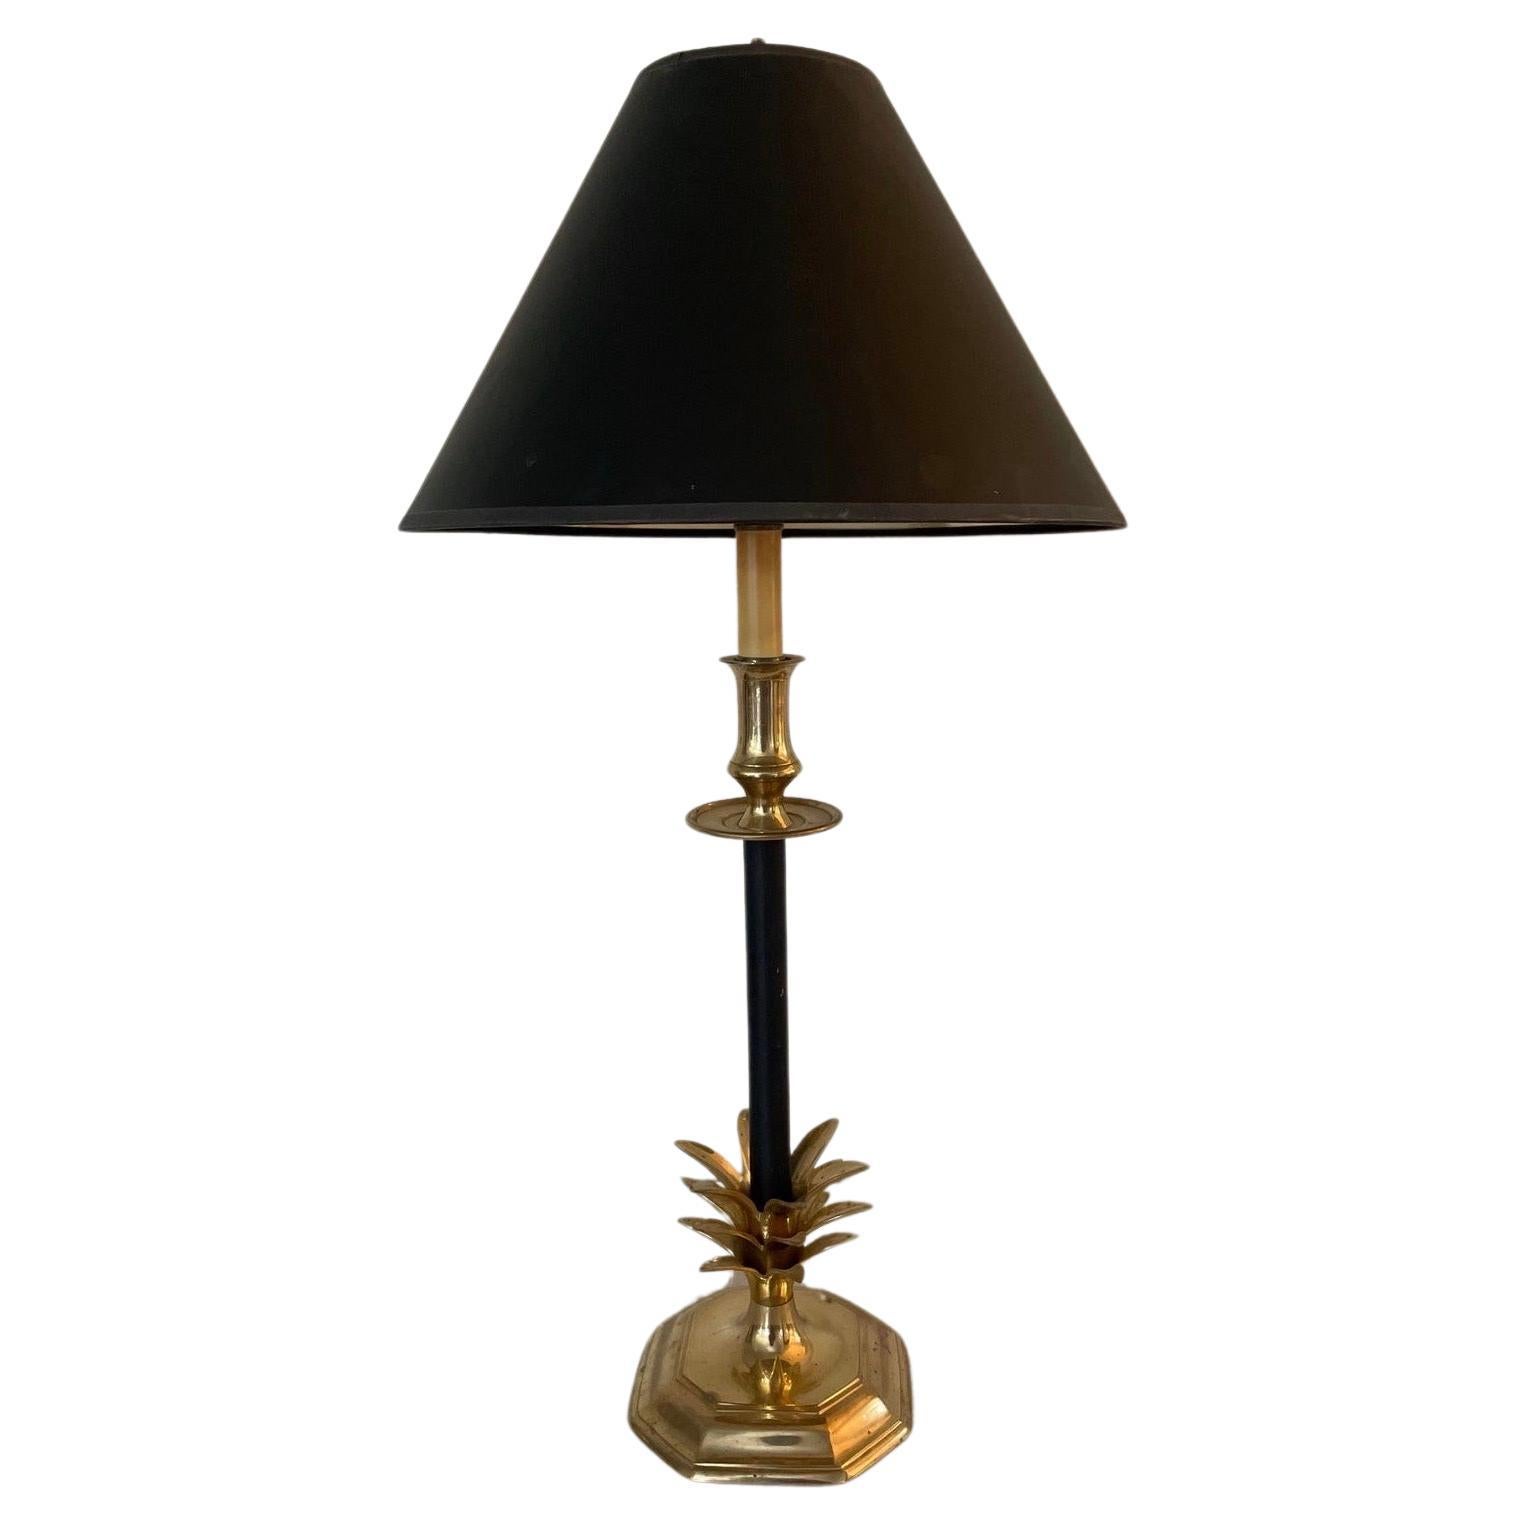 MCM Palm Regency Brass and Black Palm Leaf Lamp Frederick Cooper Style